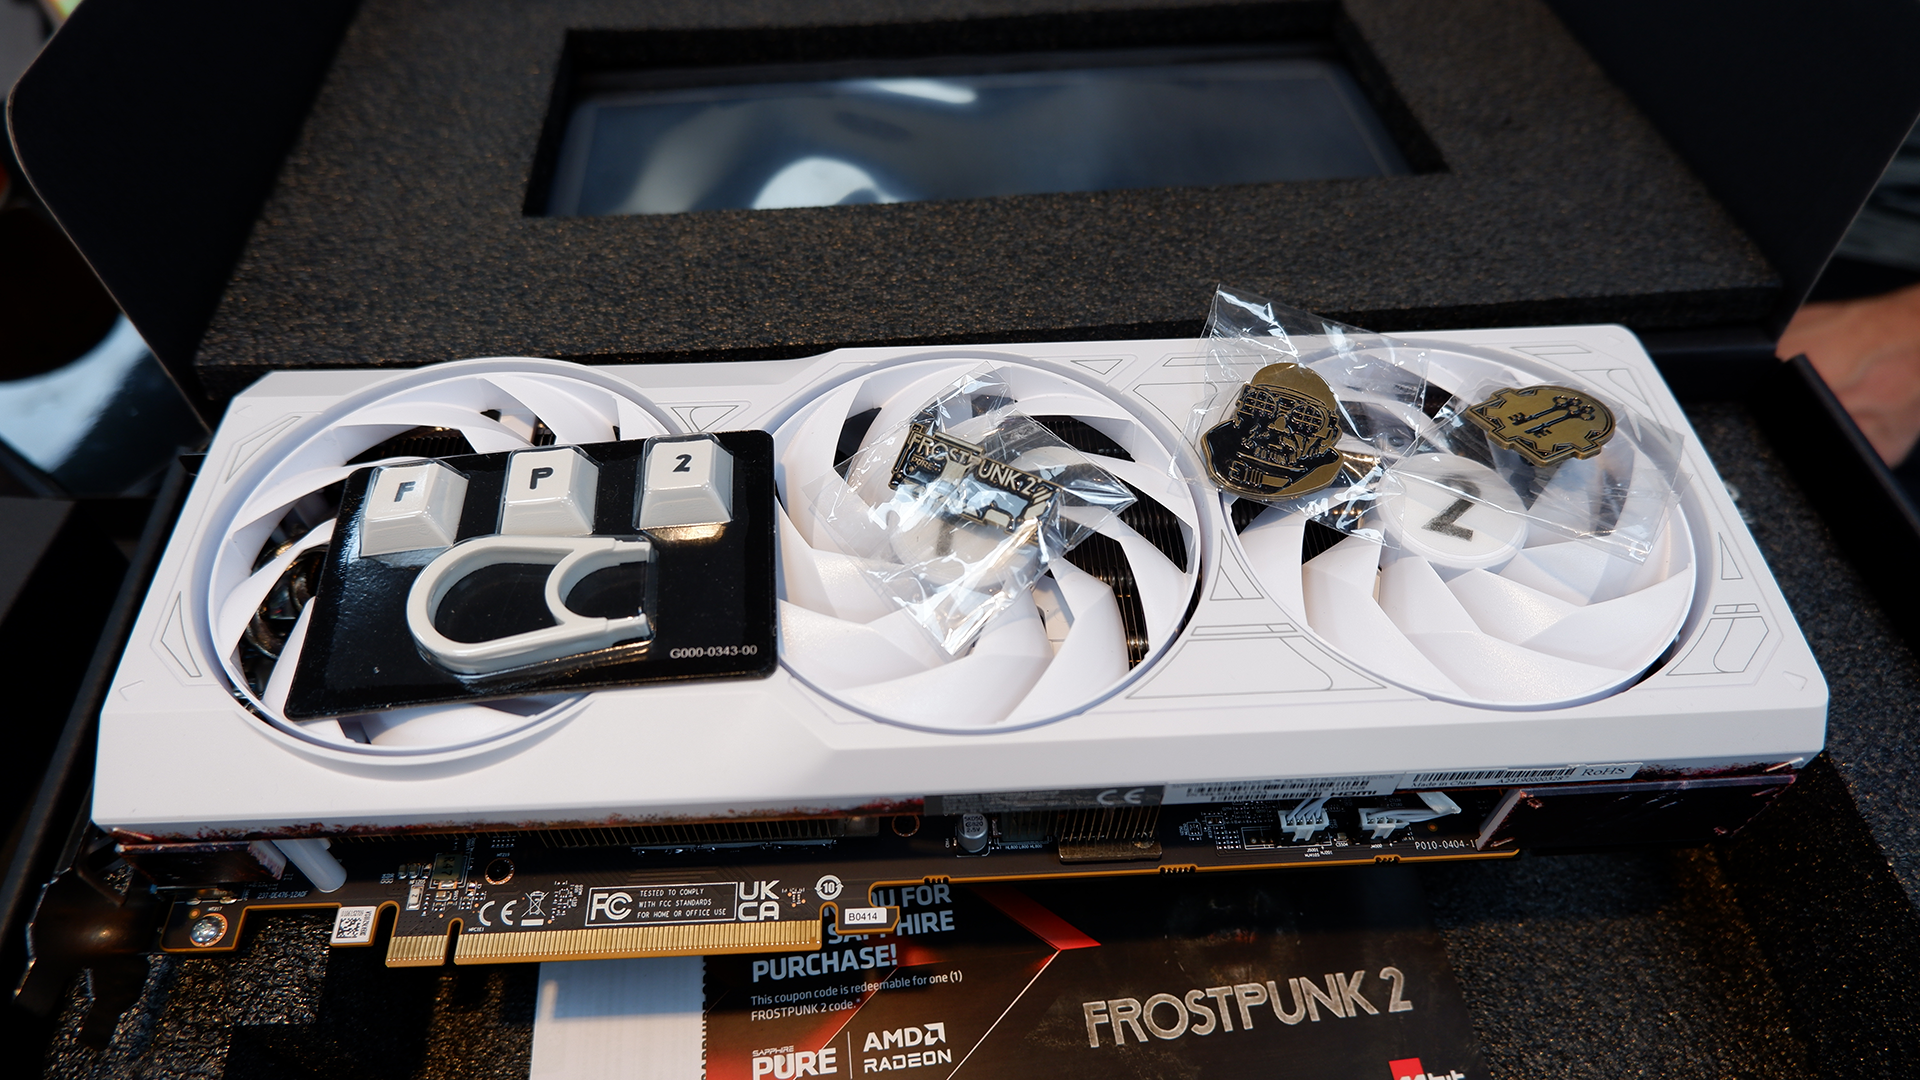 A Frostpunk 2 themed graphics card from Sapphire.